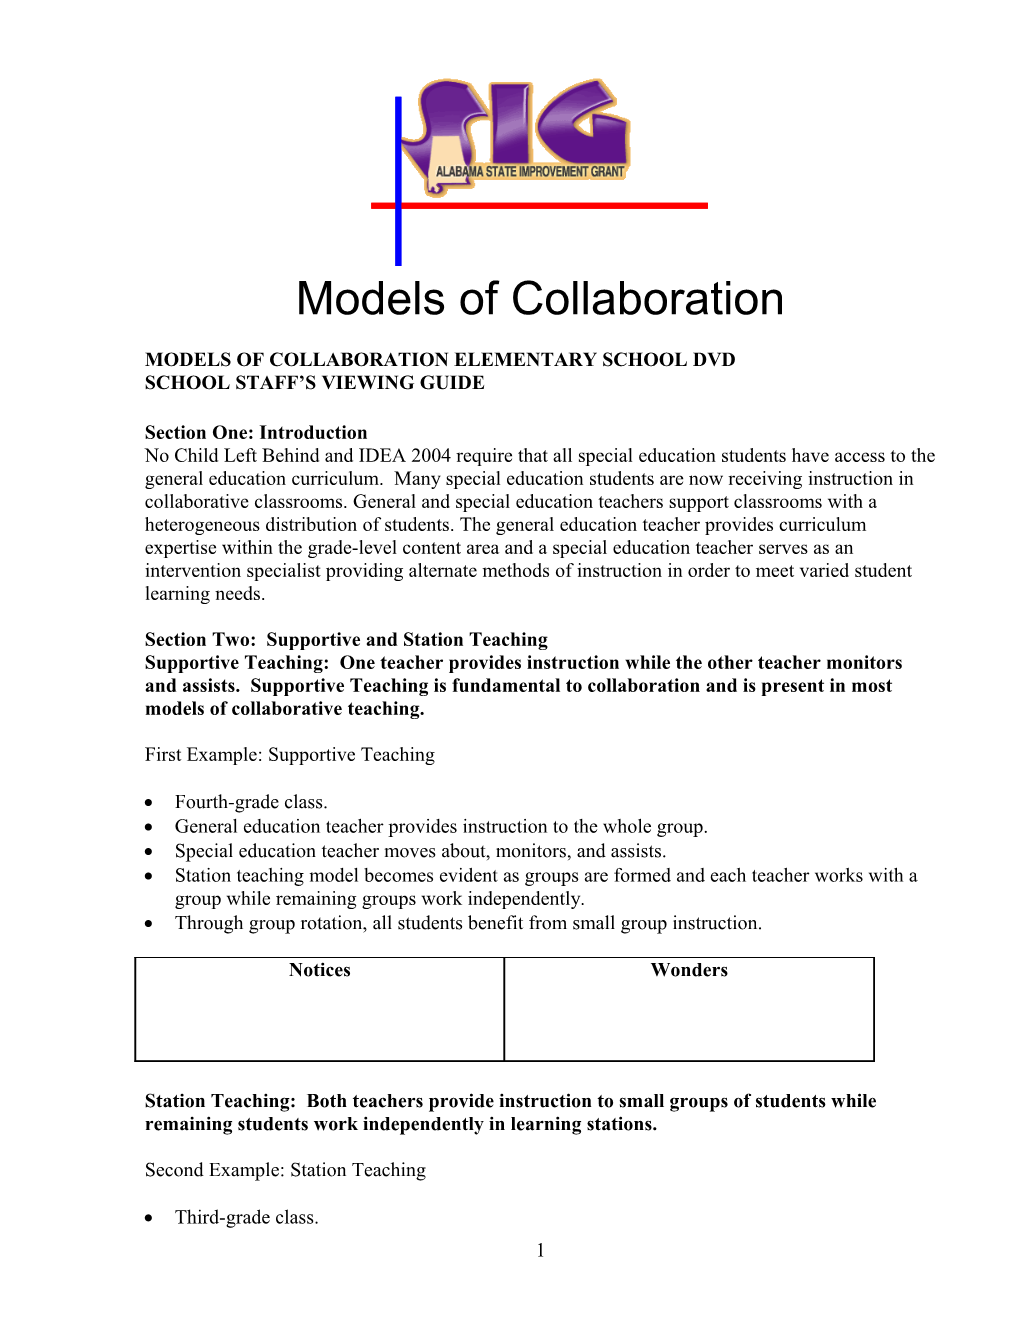 Models of Collaboration s1